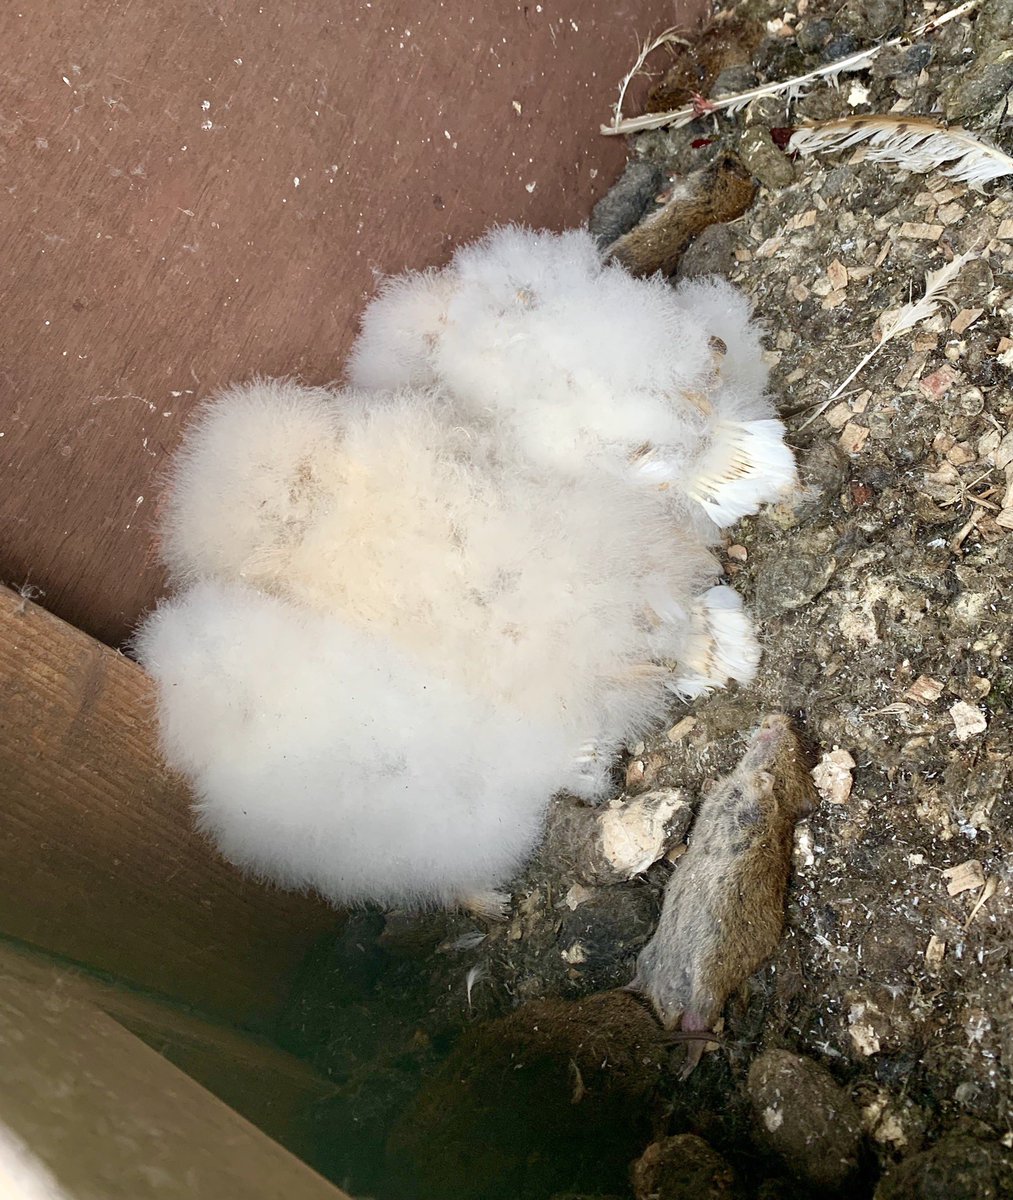 We are privileged enough to be monitoring a number of @stwater sites across the Midlands. Yesterday we were checking nest boxes & found 3 healthy barn owl chicks with a fantastic cache of food even in this weather. Shows the importance of sites like this for wildlife #opowl